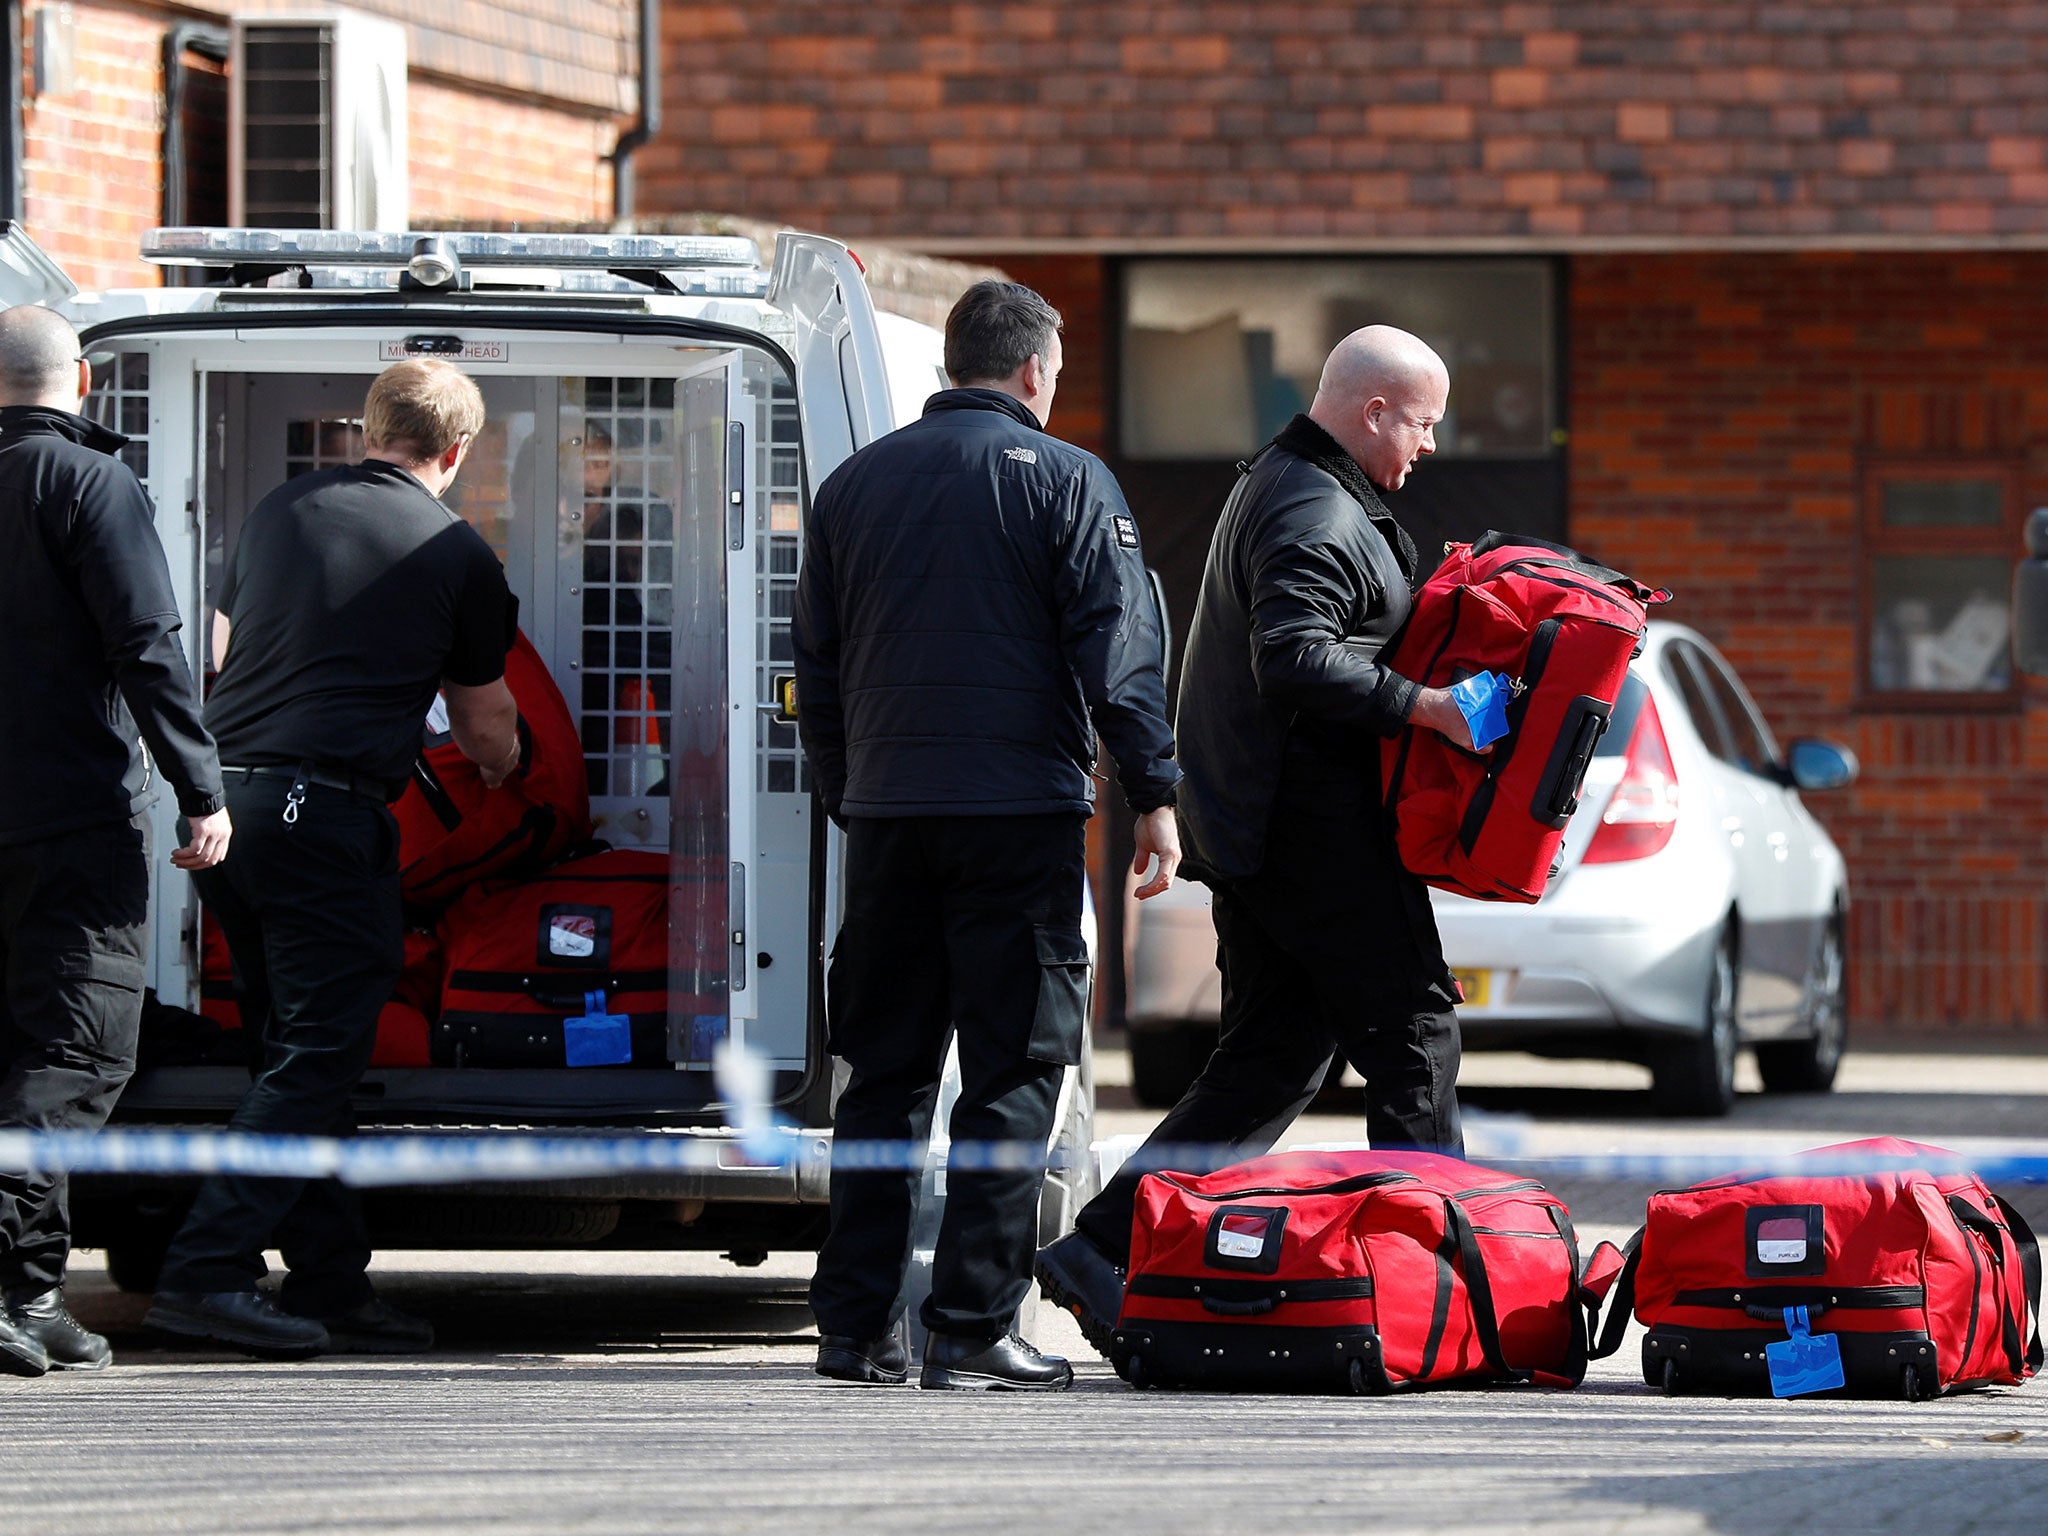 Inspectors from the Organisation for the Prohibition of Chemical Weapons (OPCW) arrive to begin work at the scene of the nerve agent attack